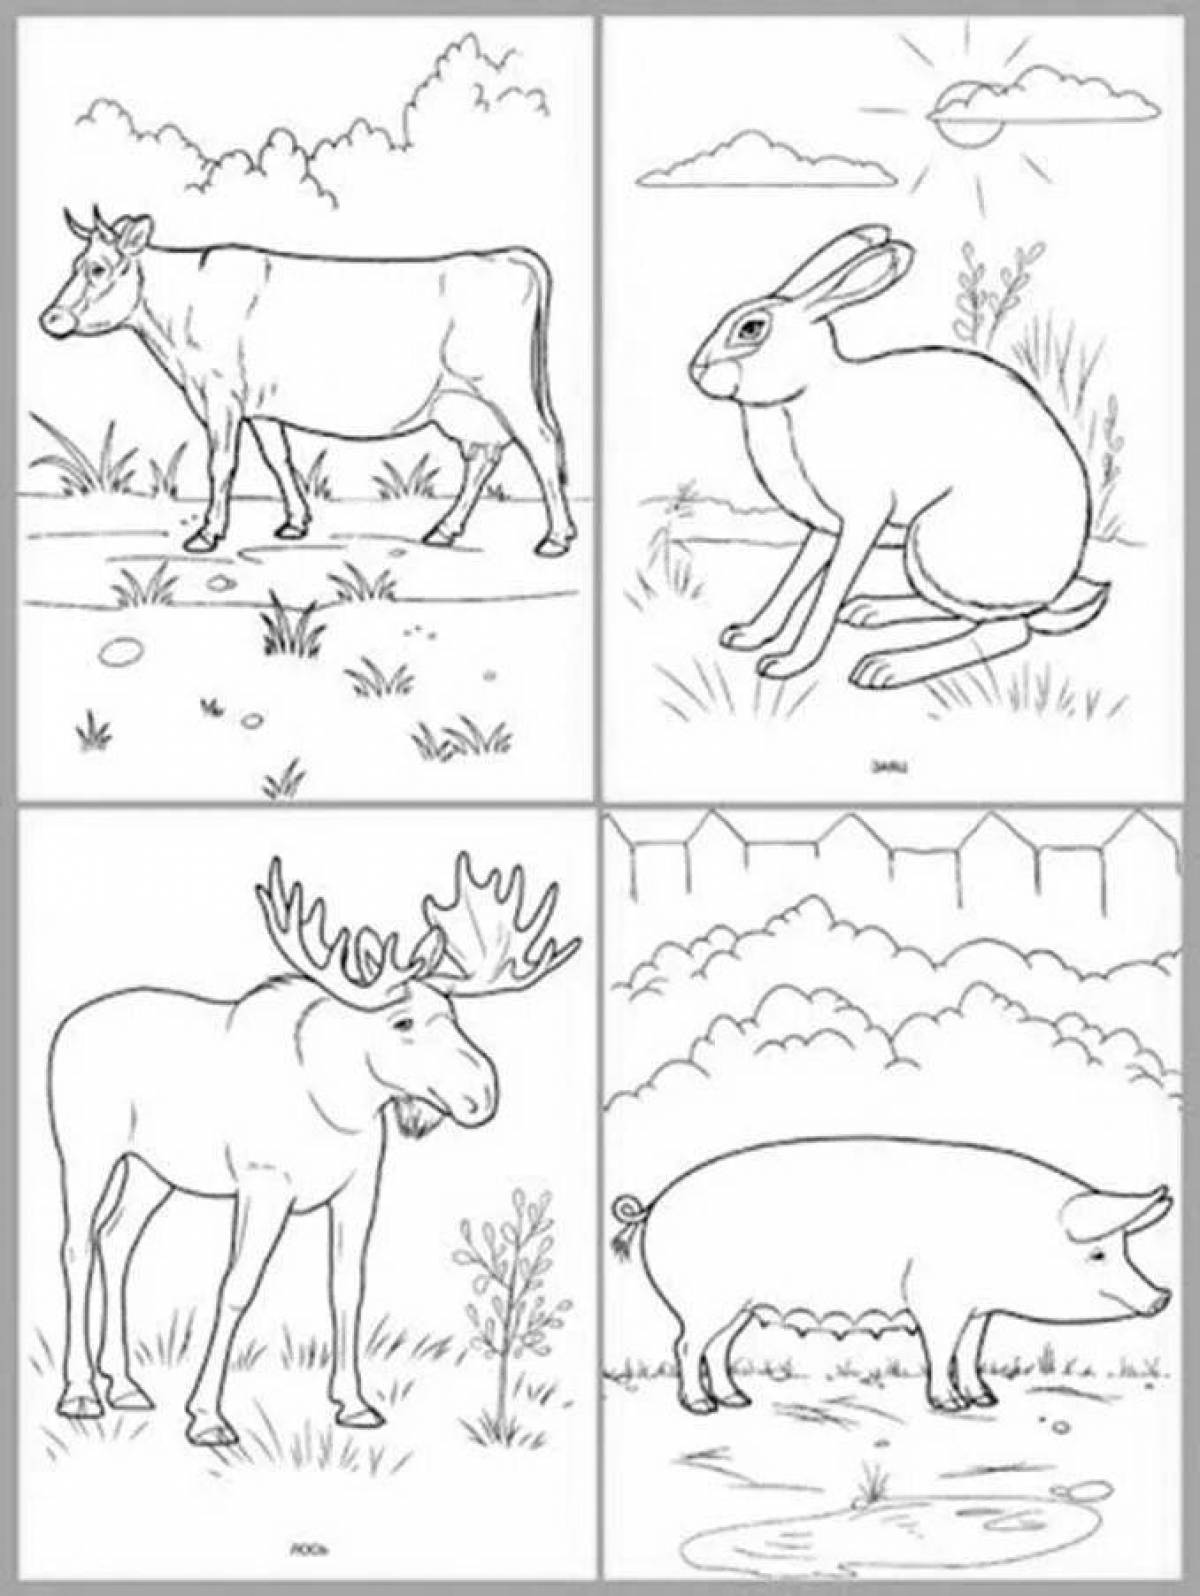 Playful coloring of wild animals